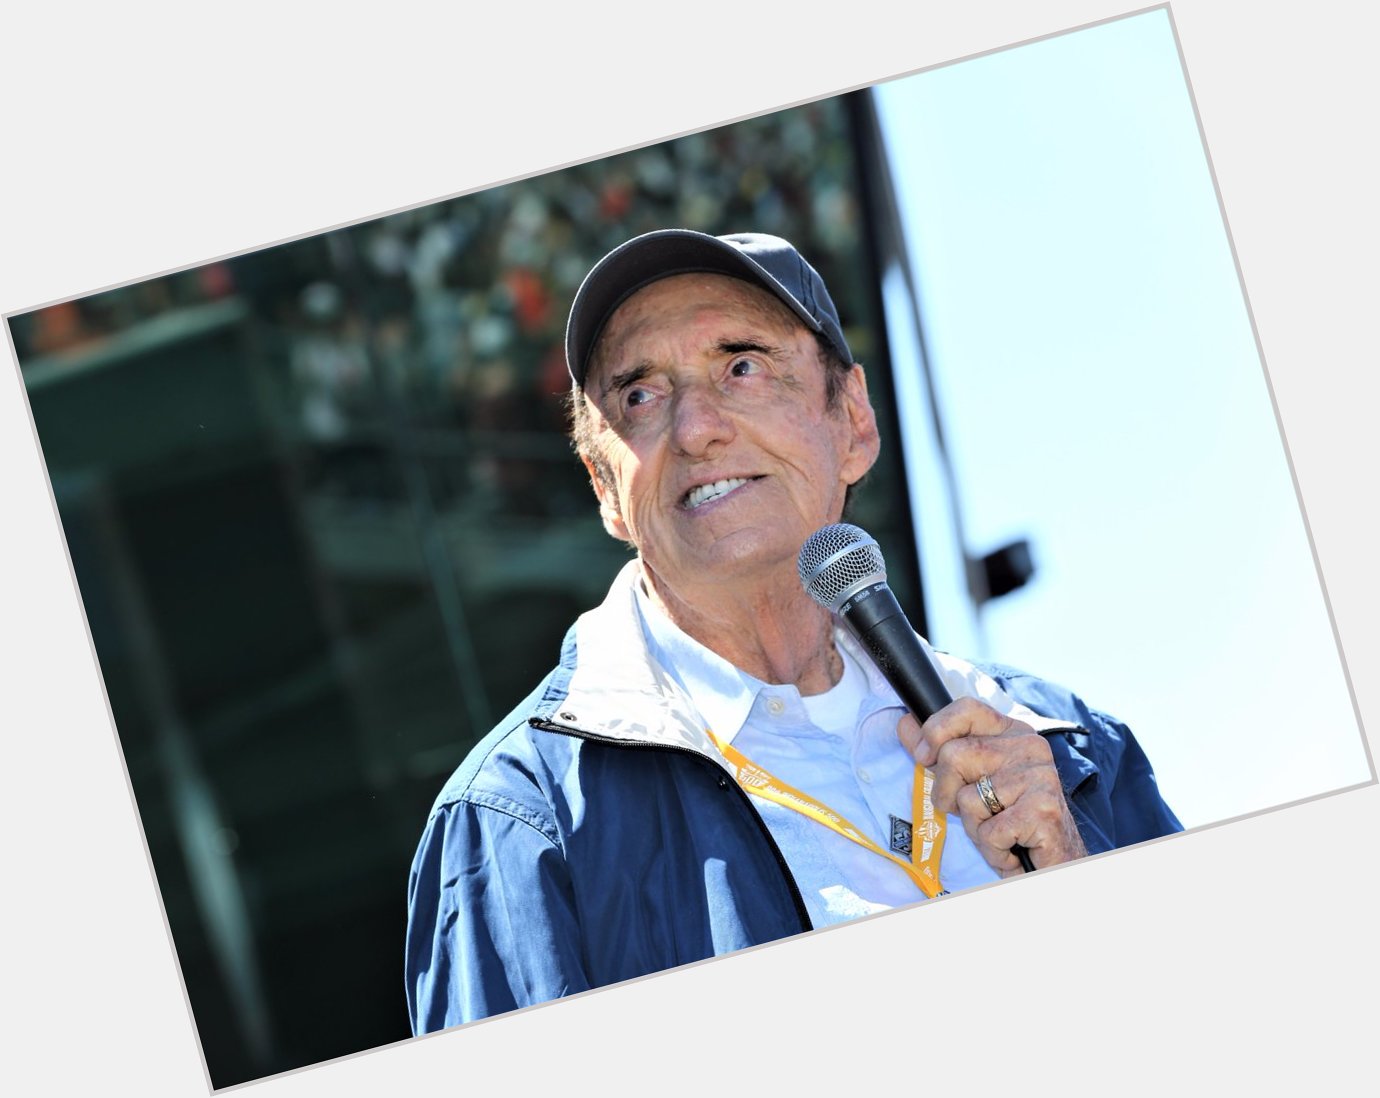 To help us wish the legendary Jim Nabors a very happy 87th birthday! 